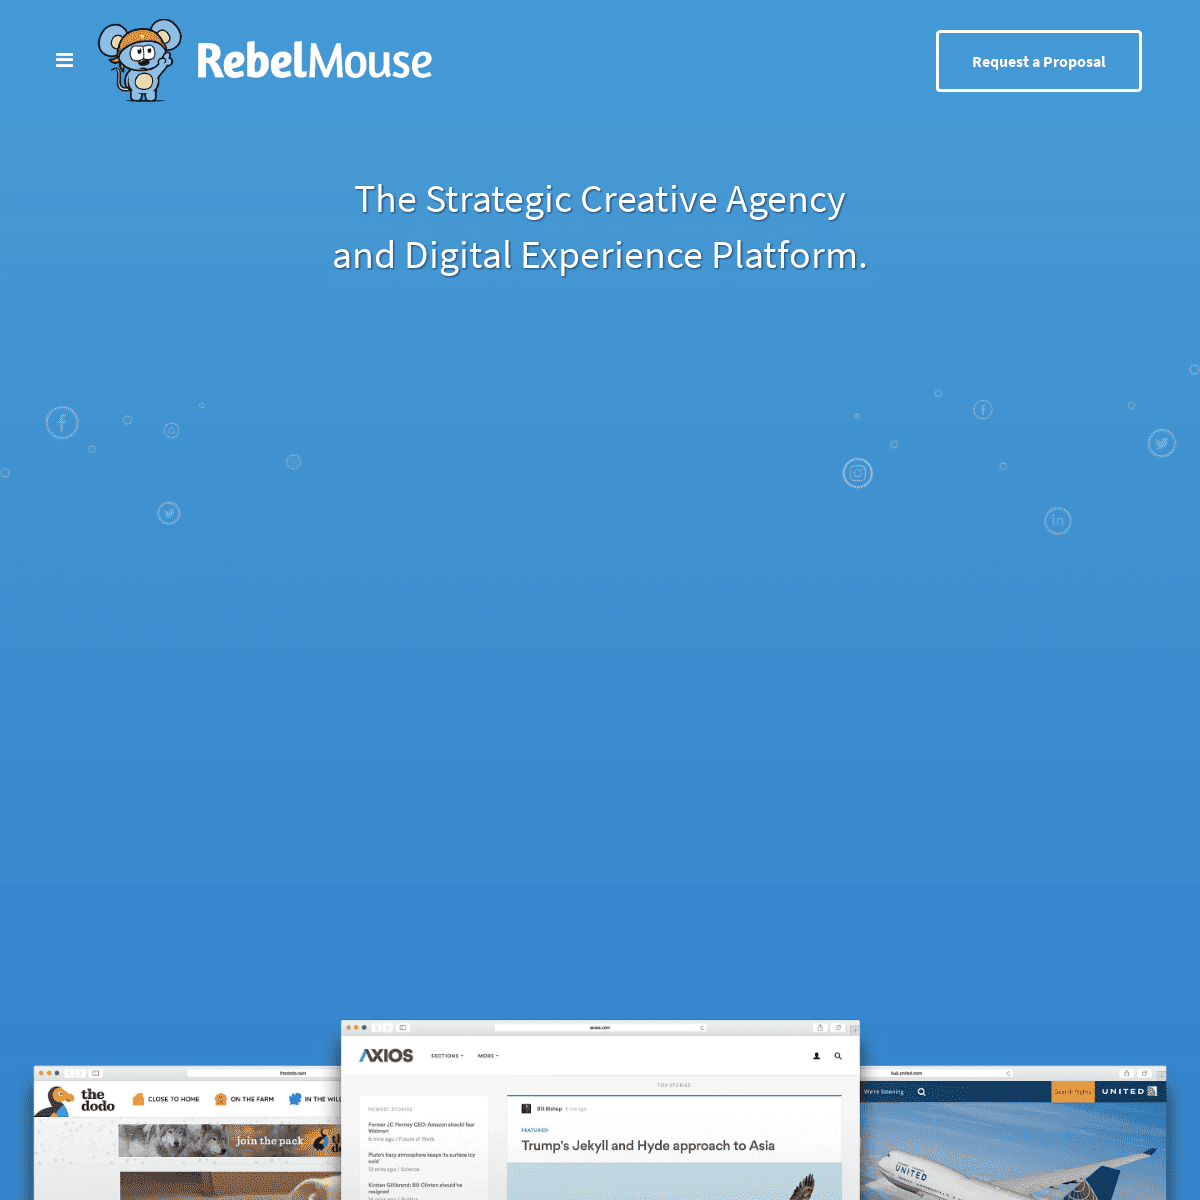 A complete backup of rebelmouse.com